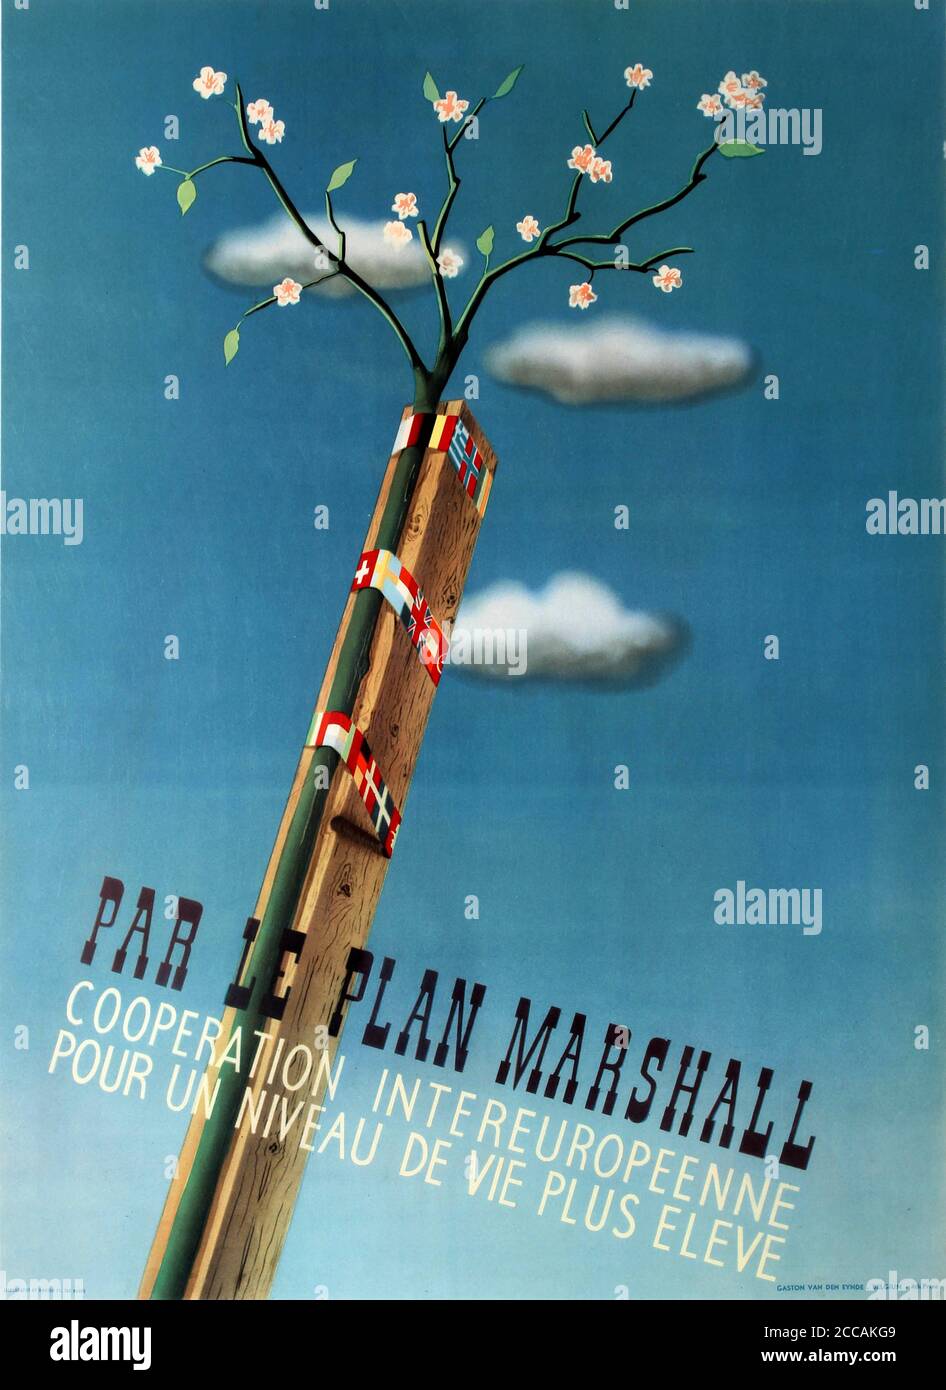 ERP. The Marshall Plan. Museum: PRIVATE COLLECTION. Author: Gaston Van den Eynde. Stock Photo